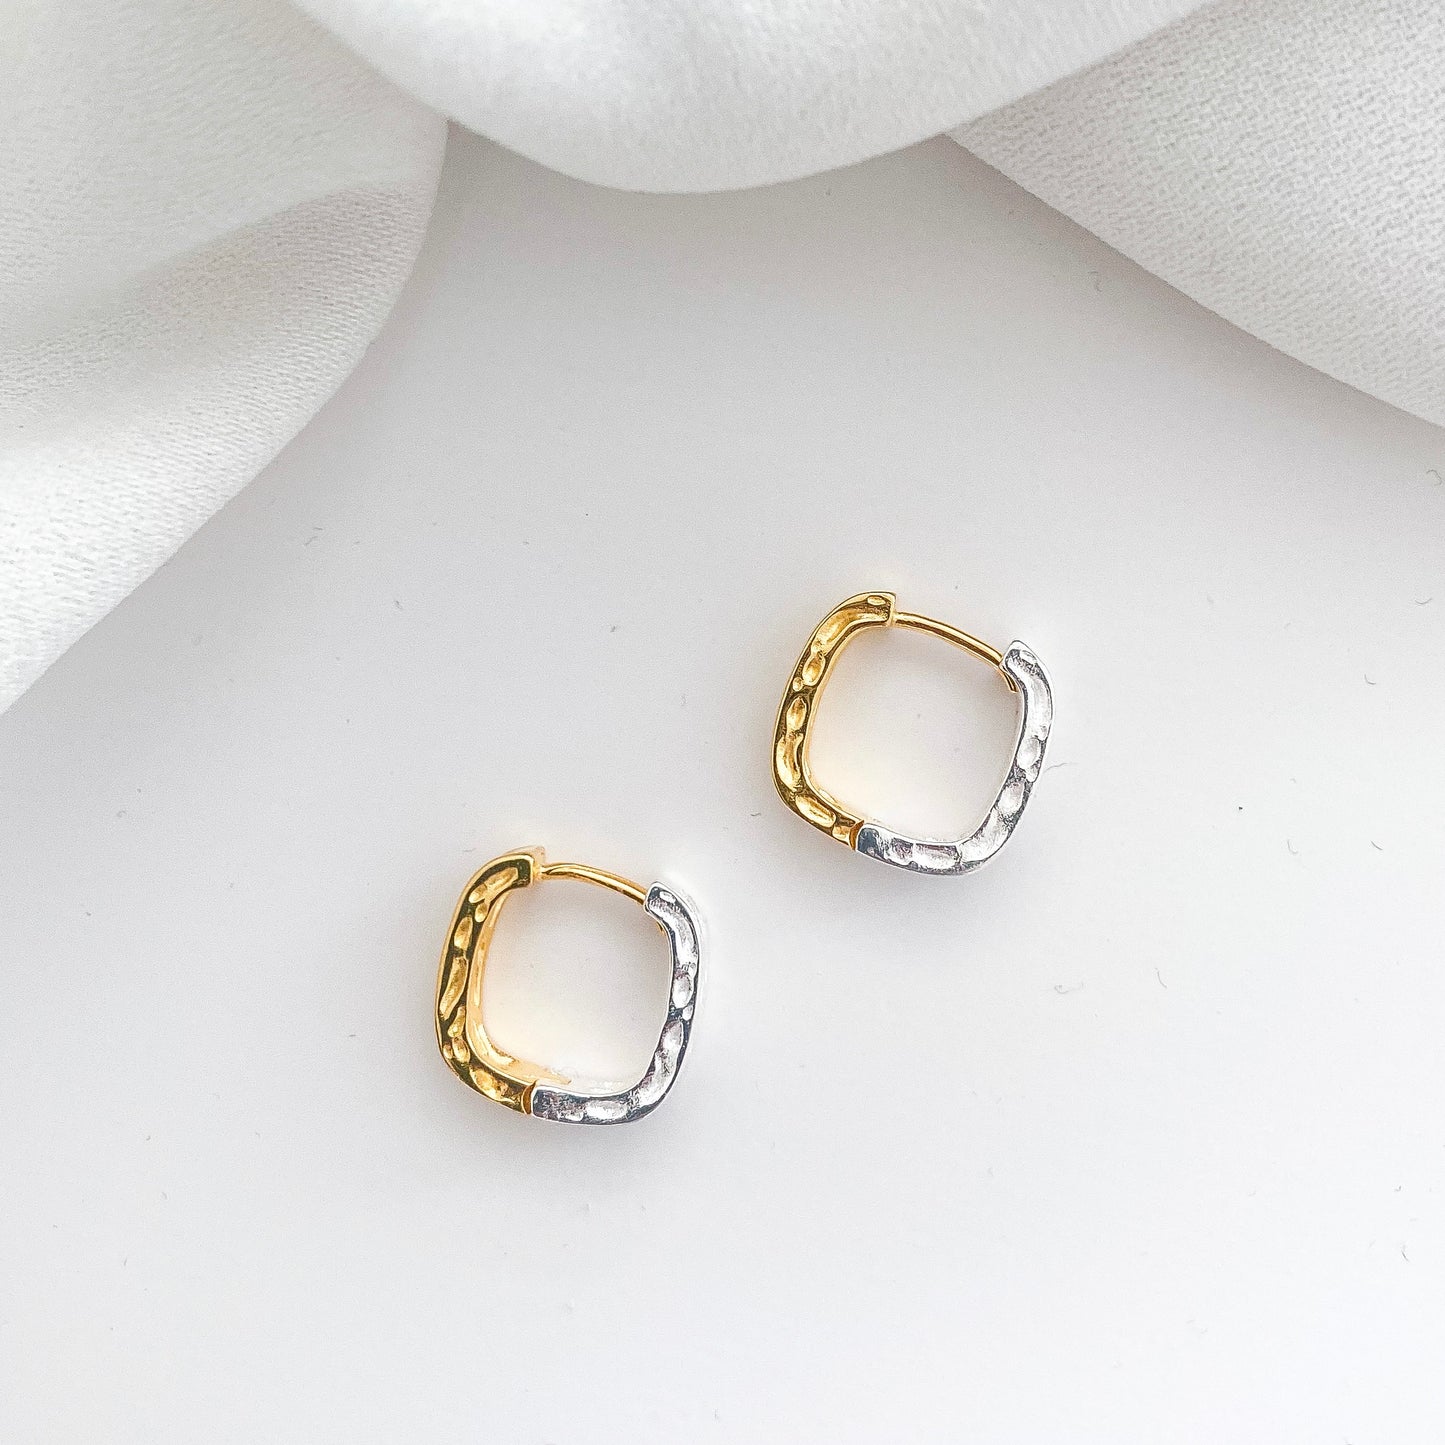 Reversible Gold and Silver Textured Earrings